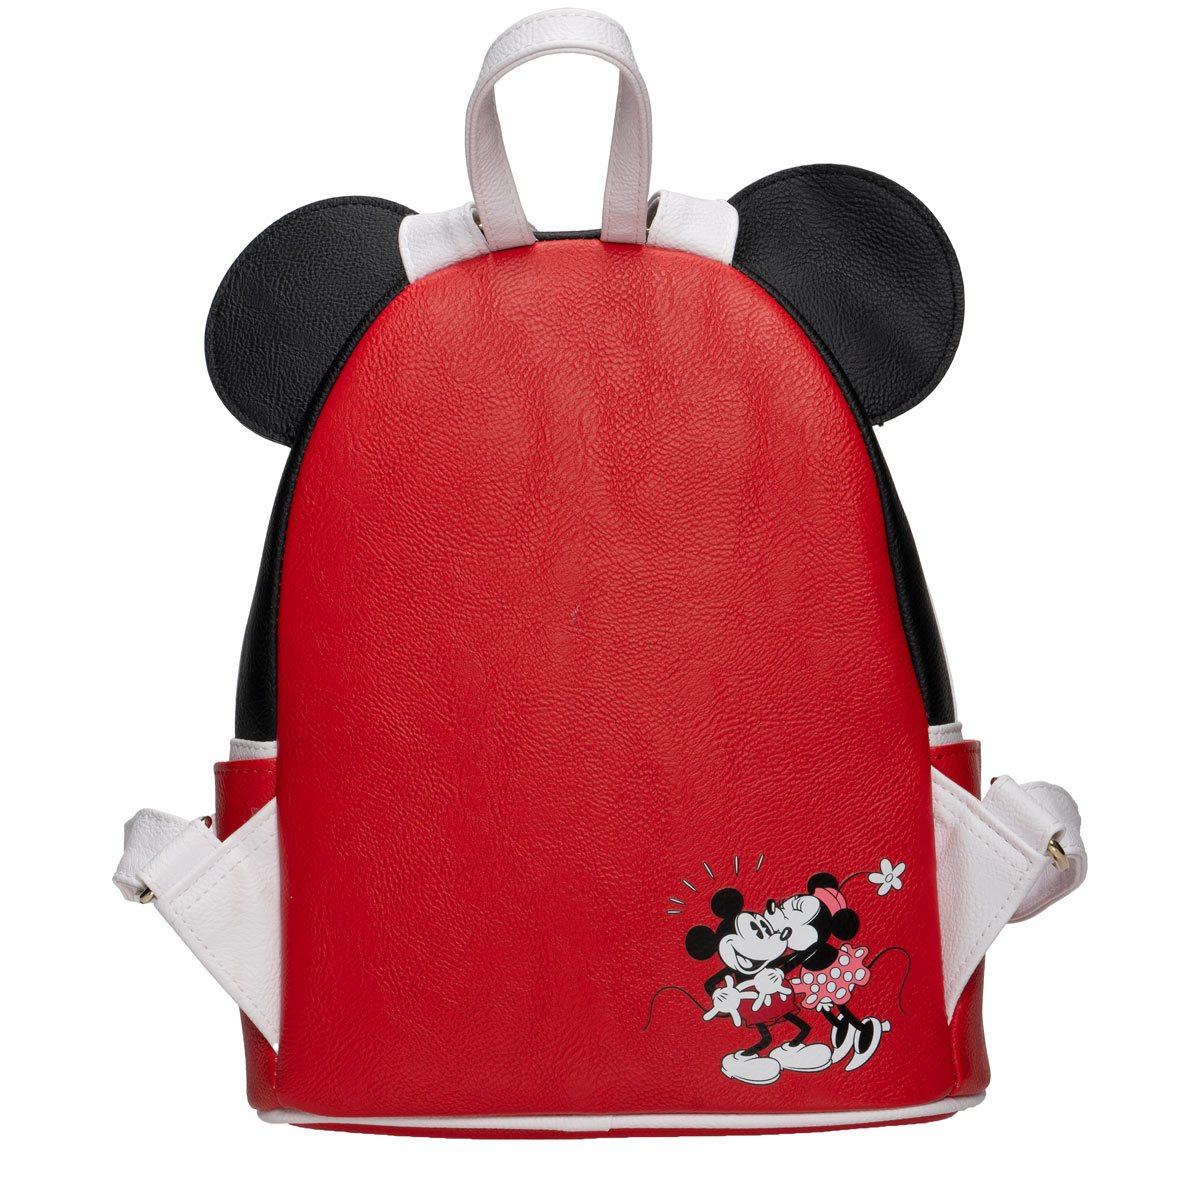 In Stock! Exclusive Loungefly Disney Minnie Mouse Chocolate